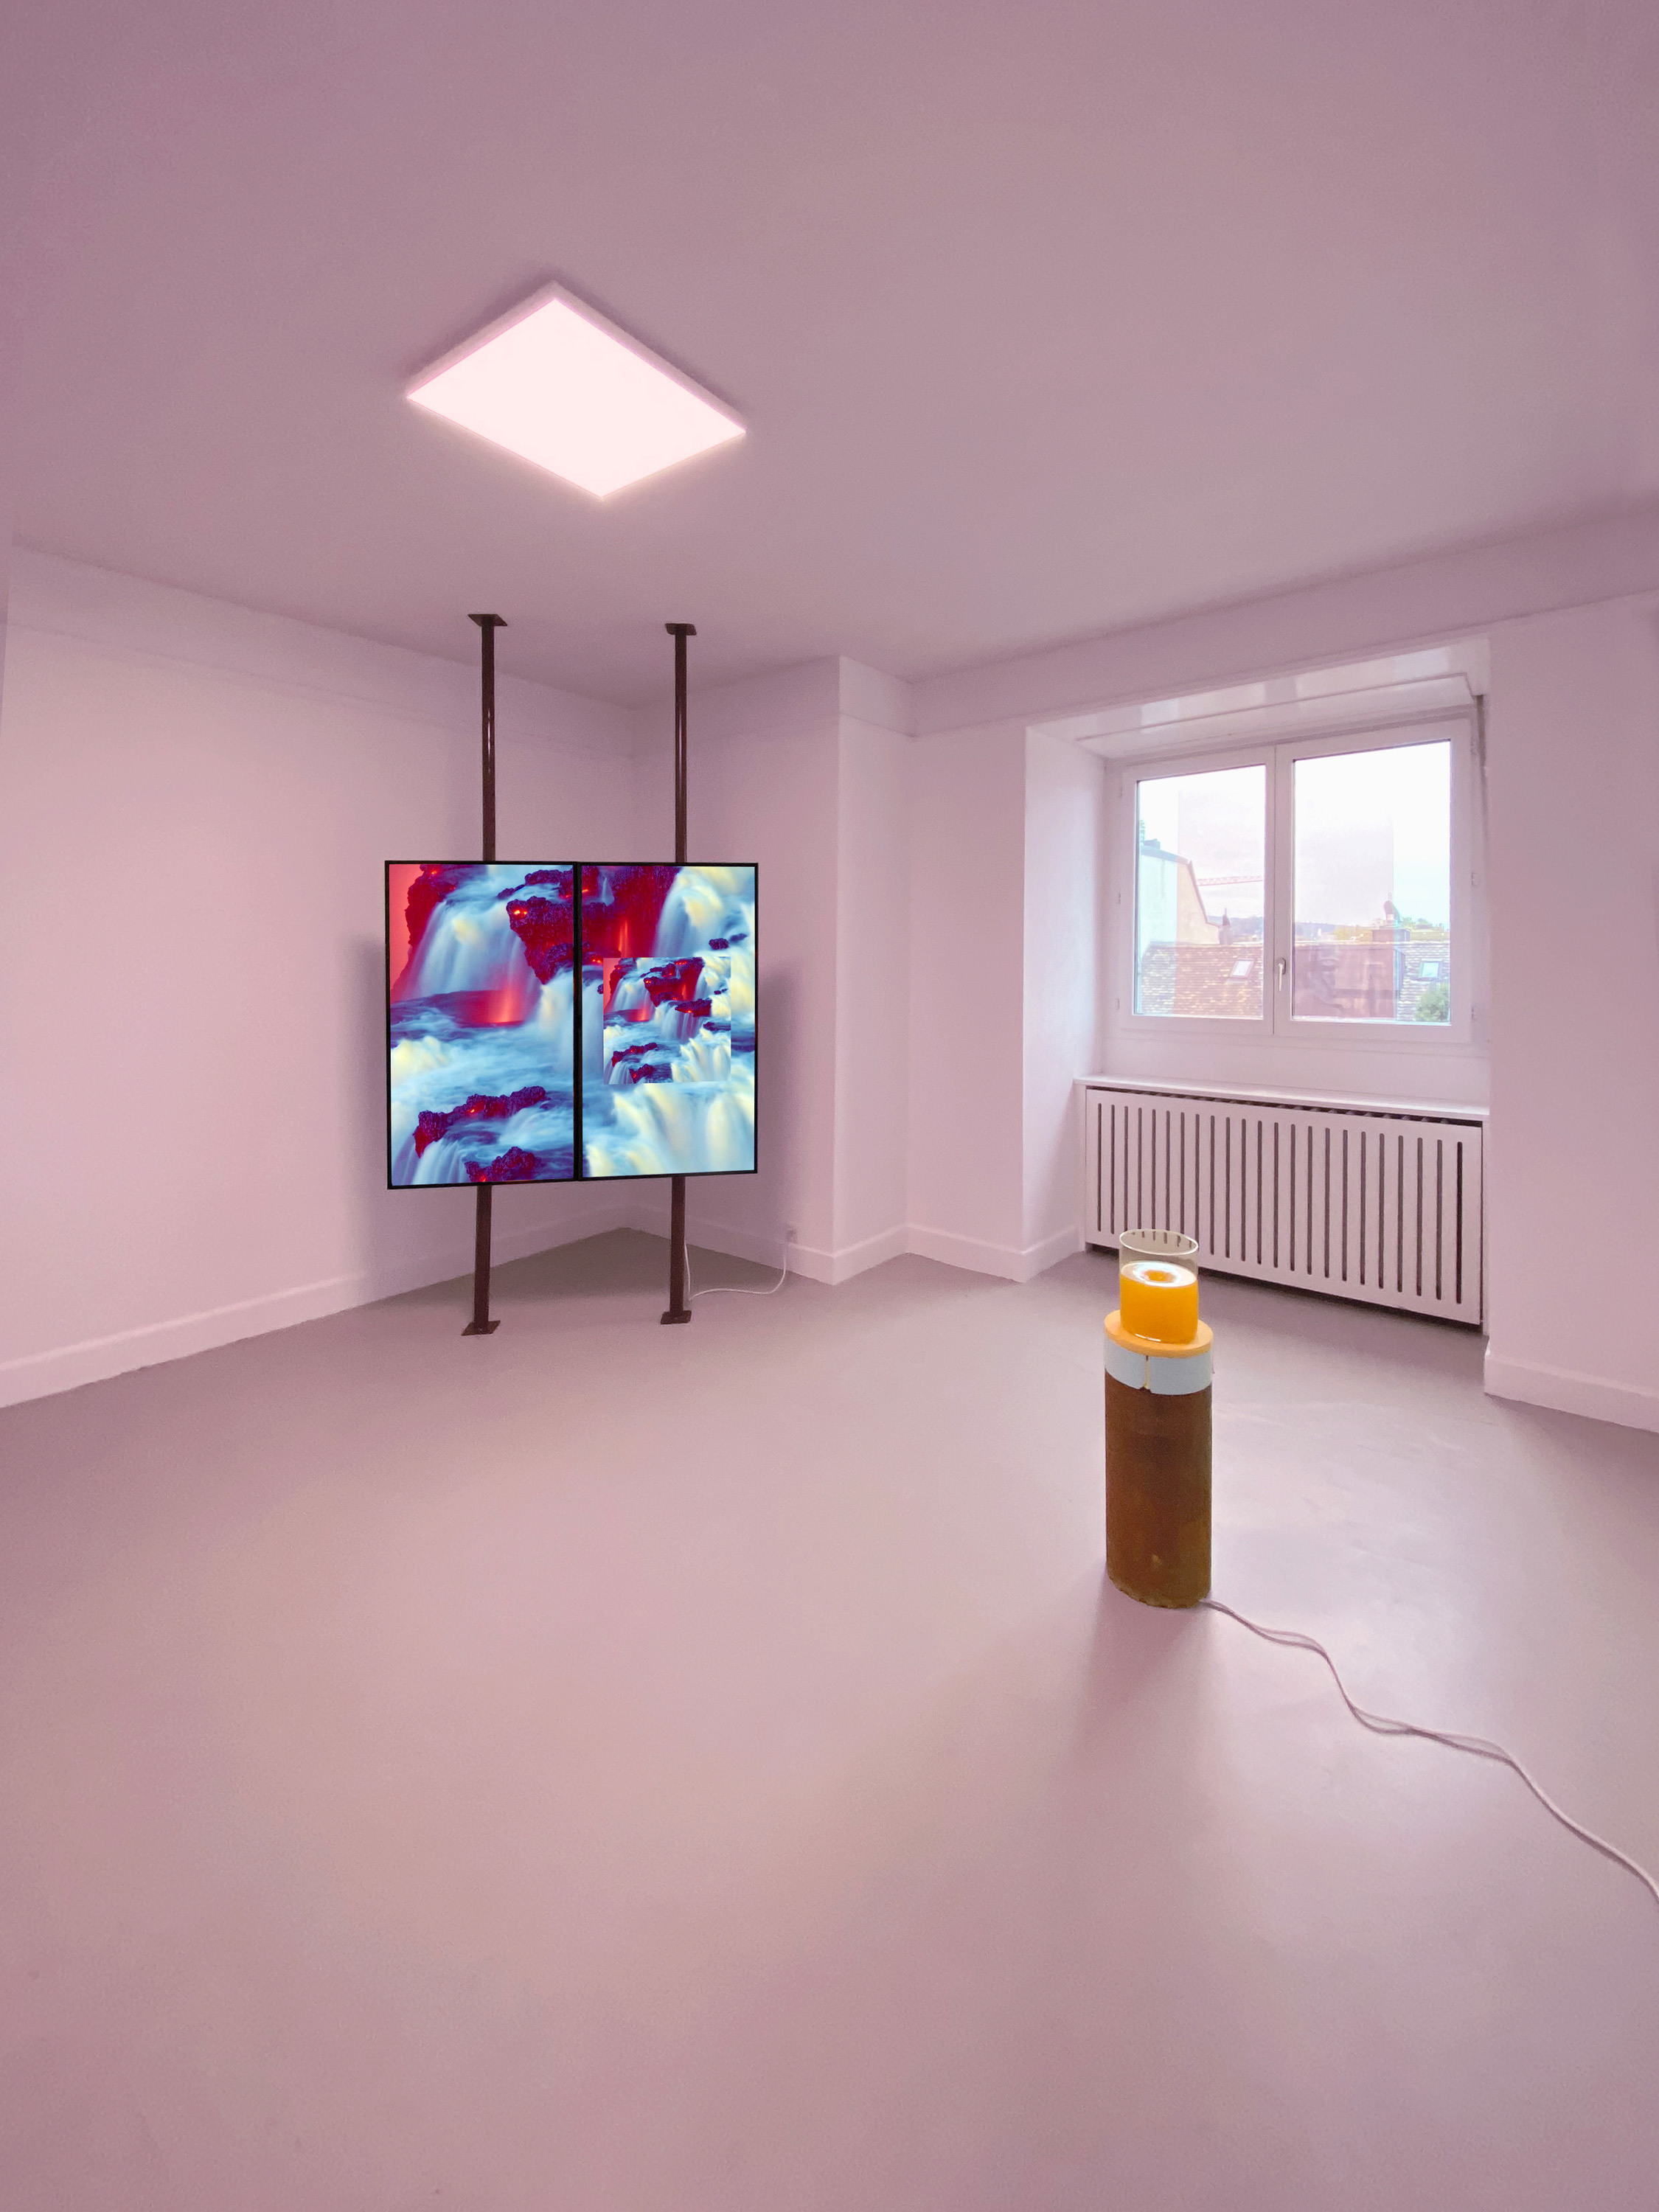 Susi Gelb: Loopzring, installation view at the Lighthouse Zurich